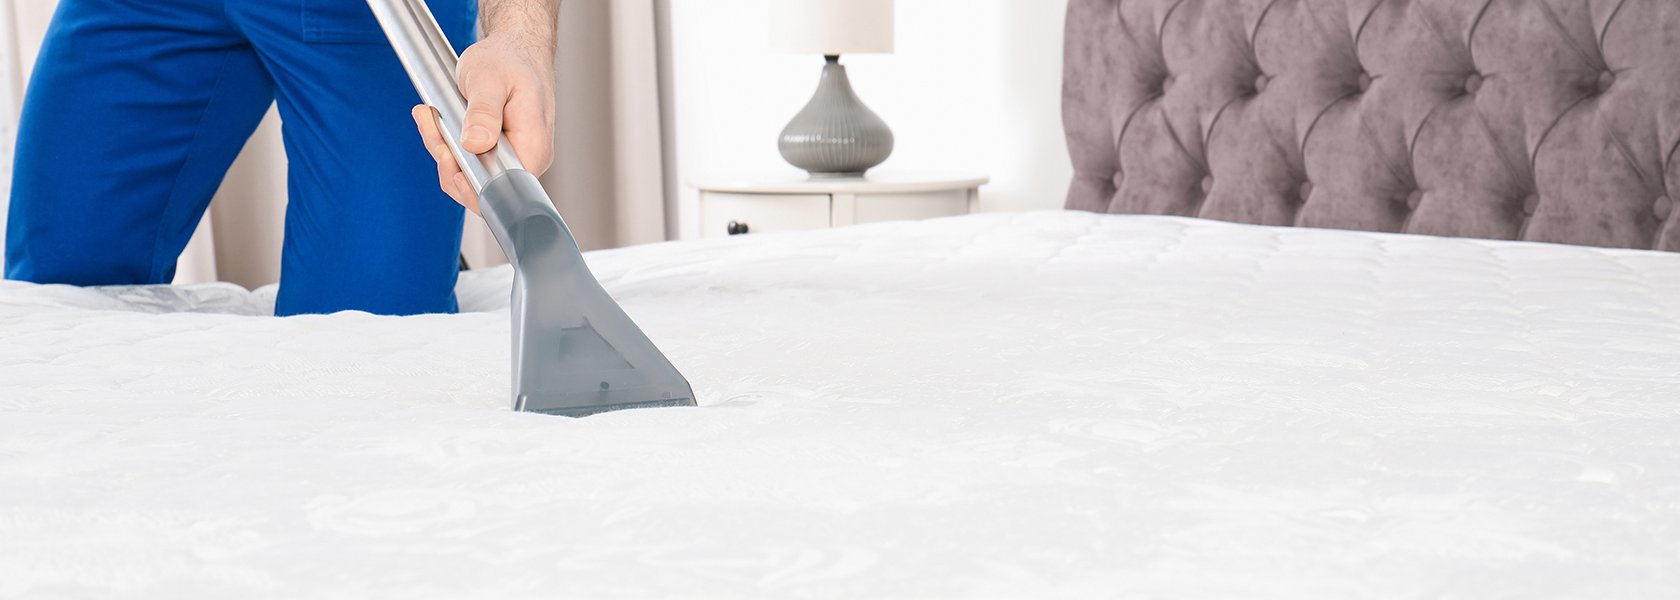 Step-By-Step Guide on Cleaning Mattress